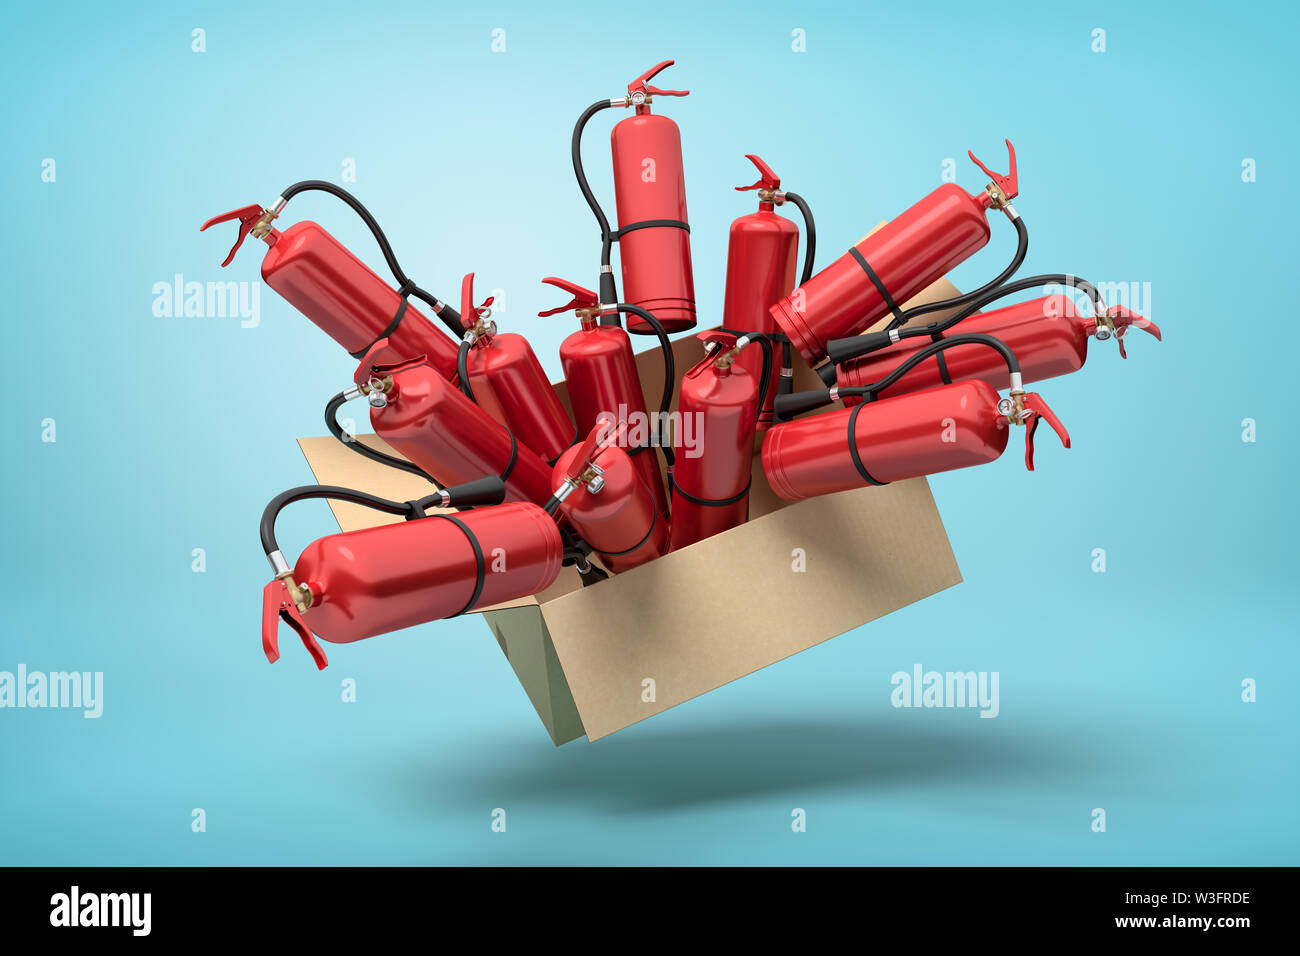 3d rendering of cardboard box in air full of red fire extinguishers which are popping out on light-blue background. Stock Photo